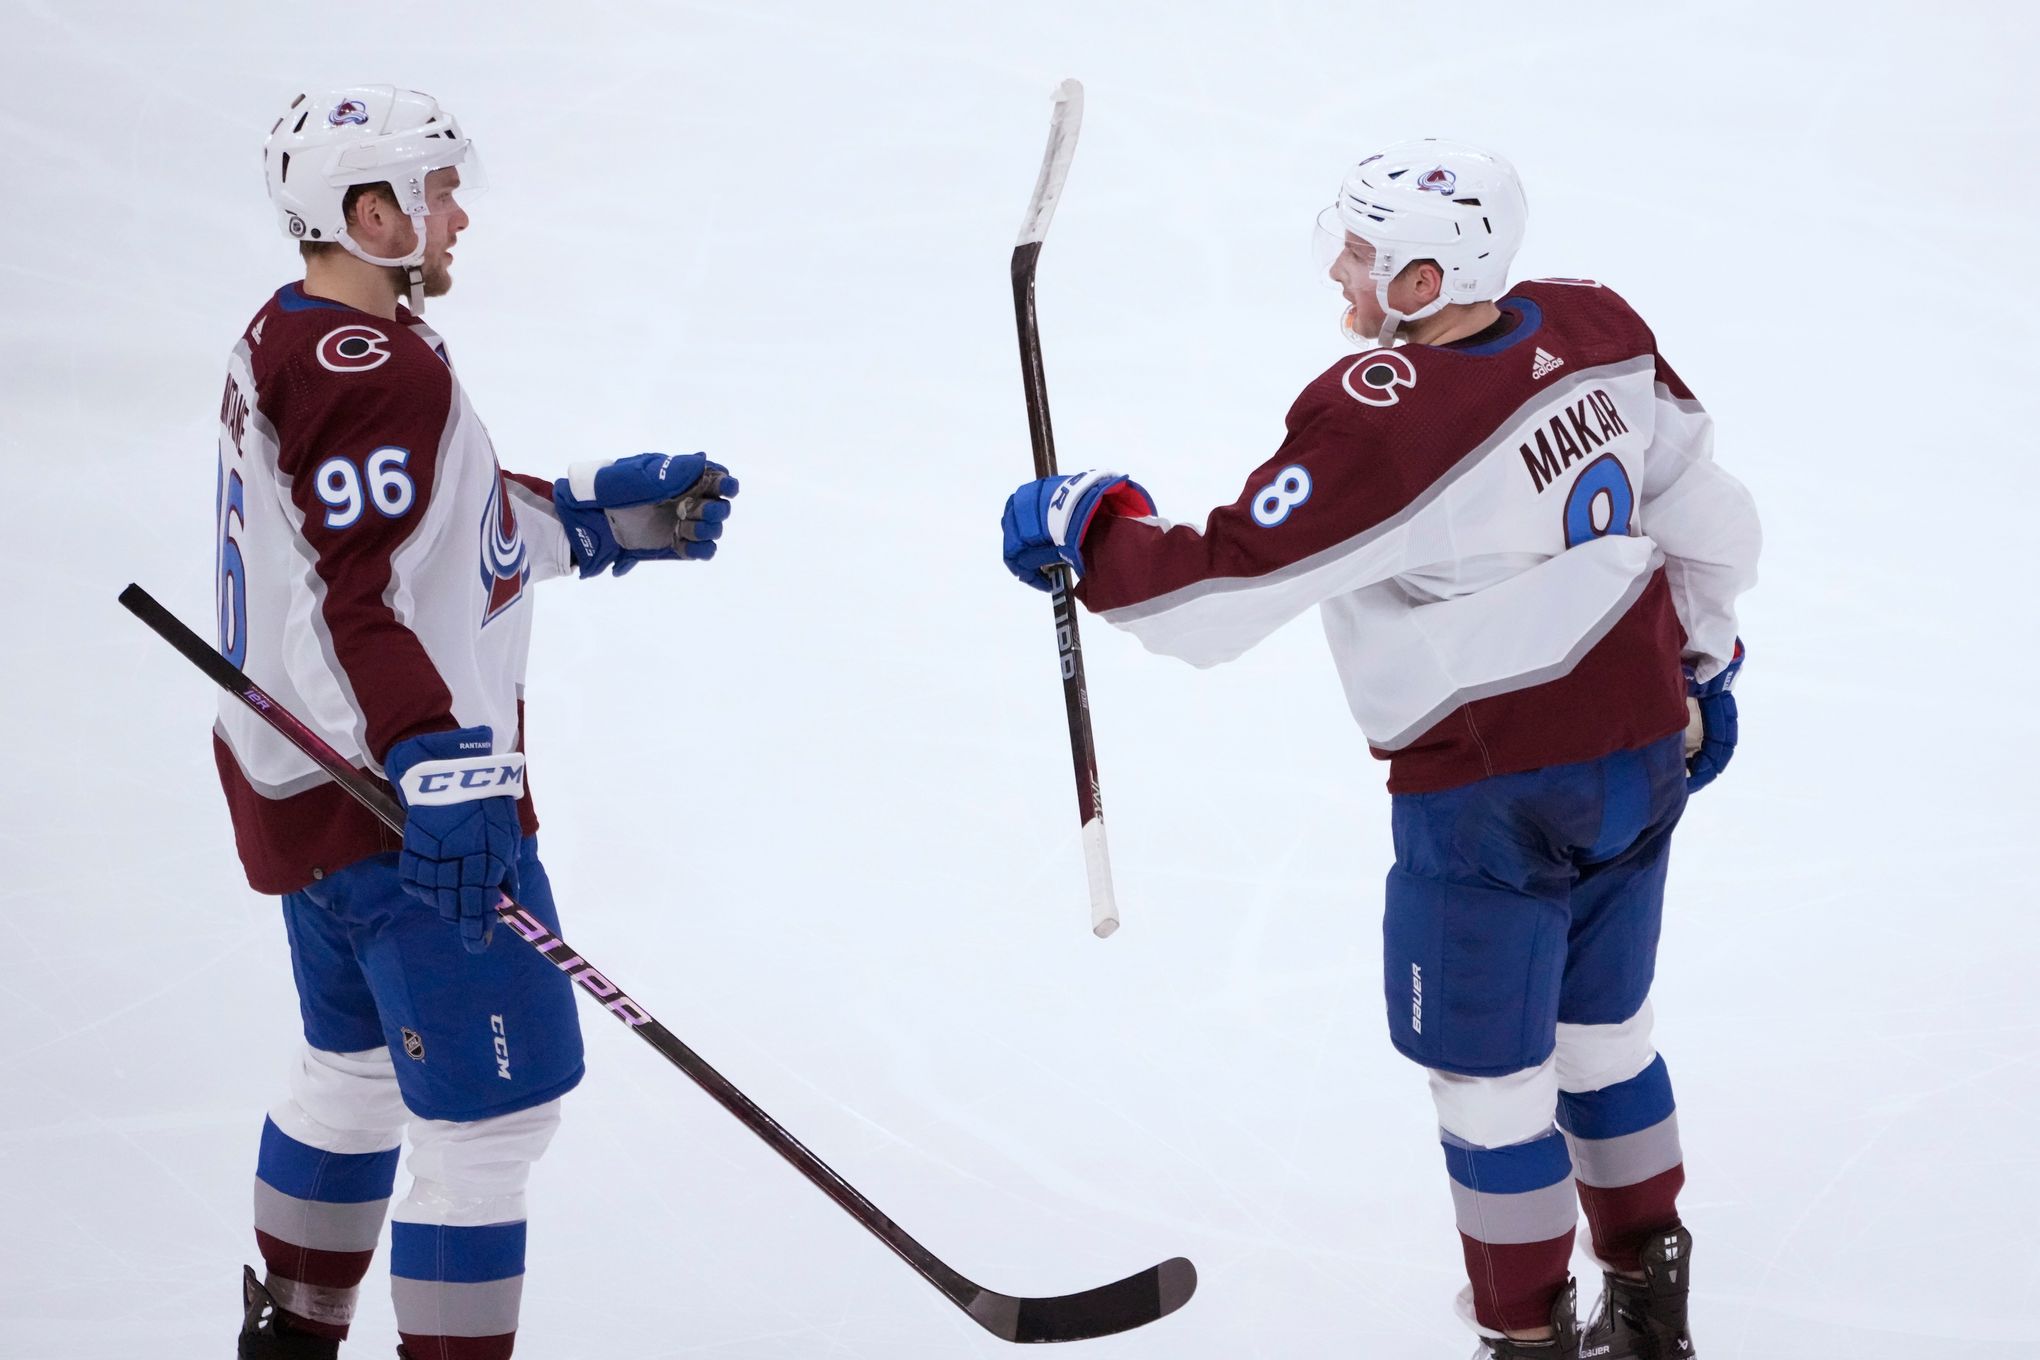 The Rink - Life after Landeskog? An analysis of the Colorado